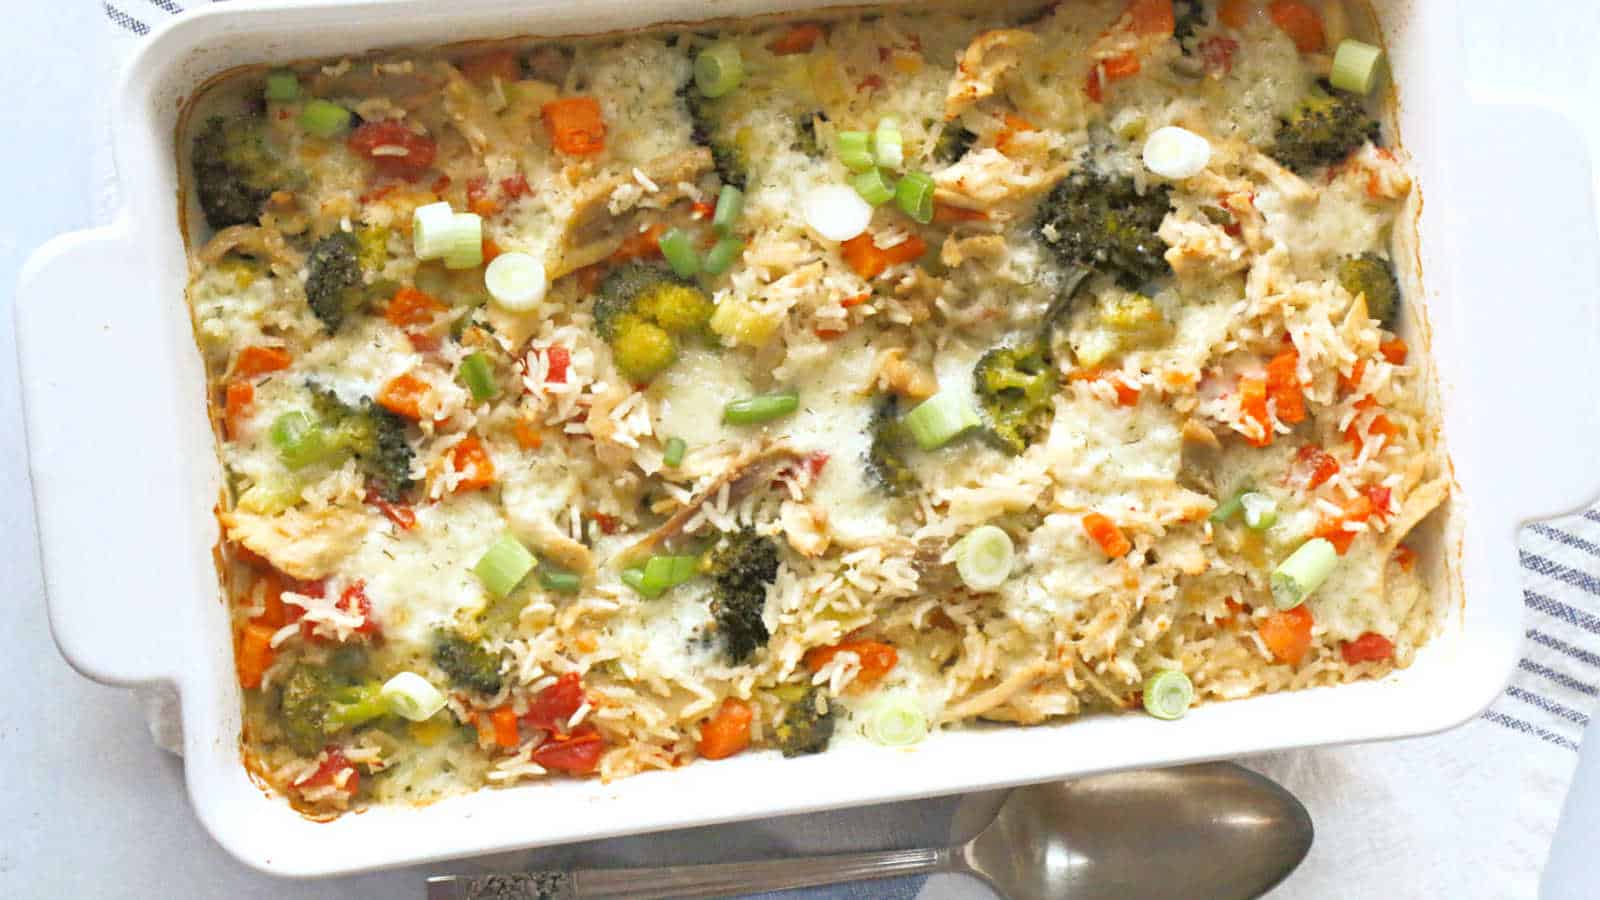 A casserole dish filled with vegetables and cheese.